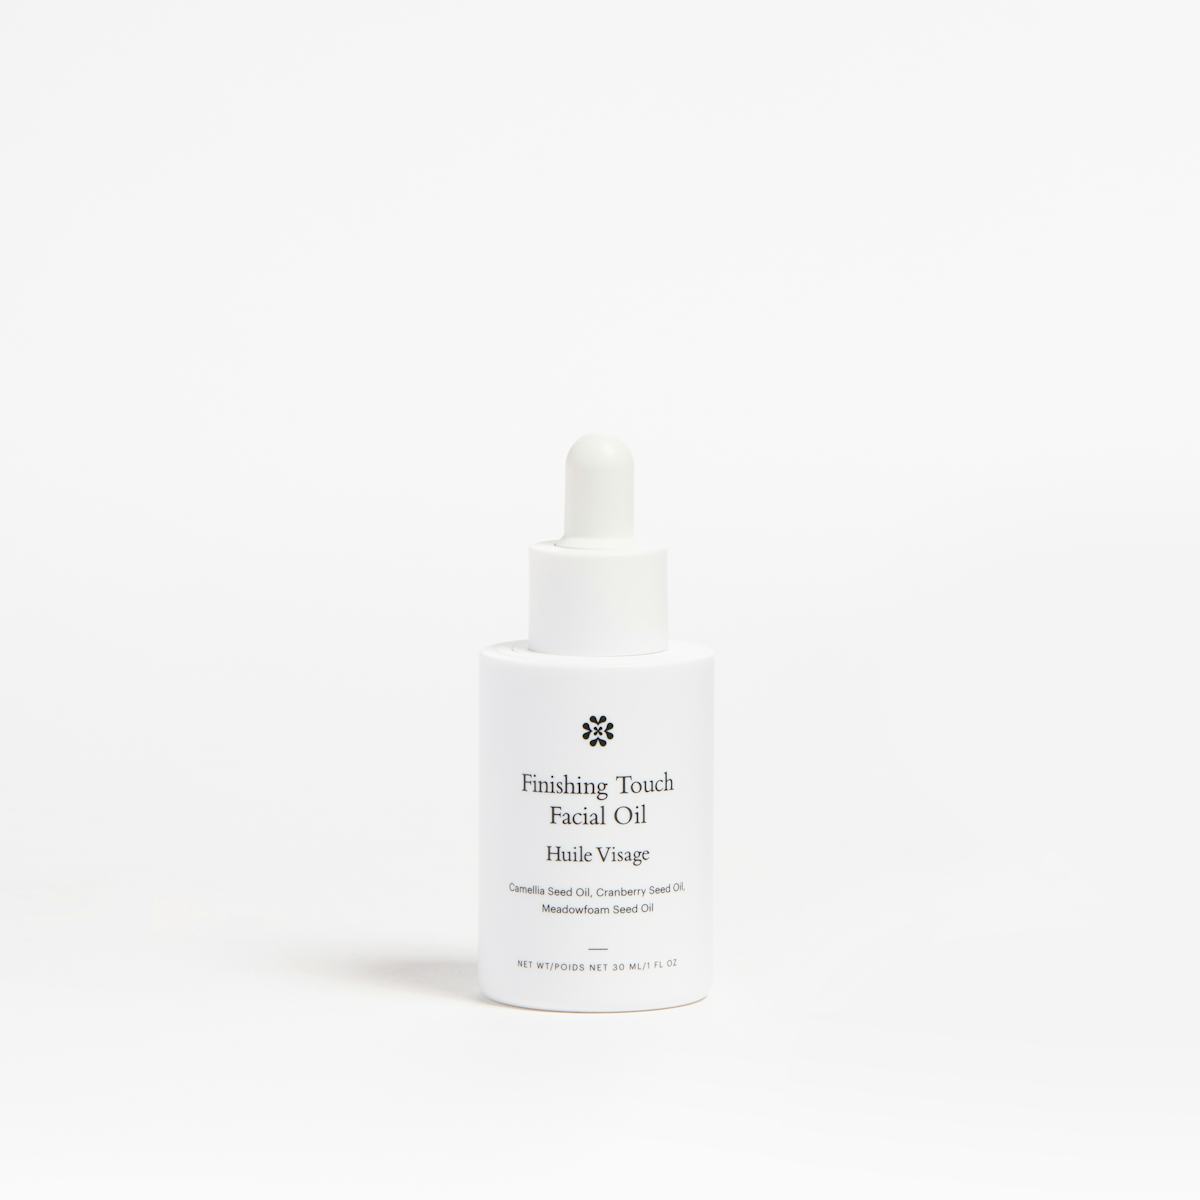 Finishing Touch Facial Oil